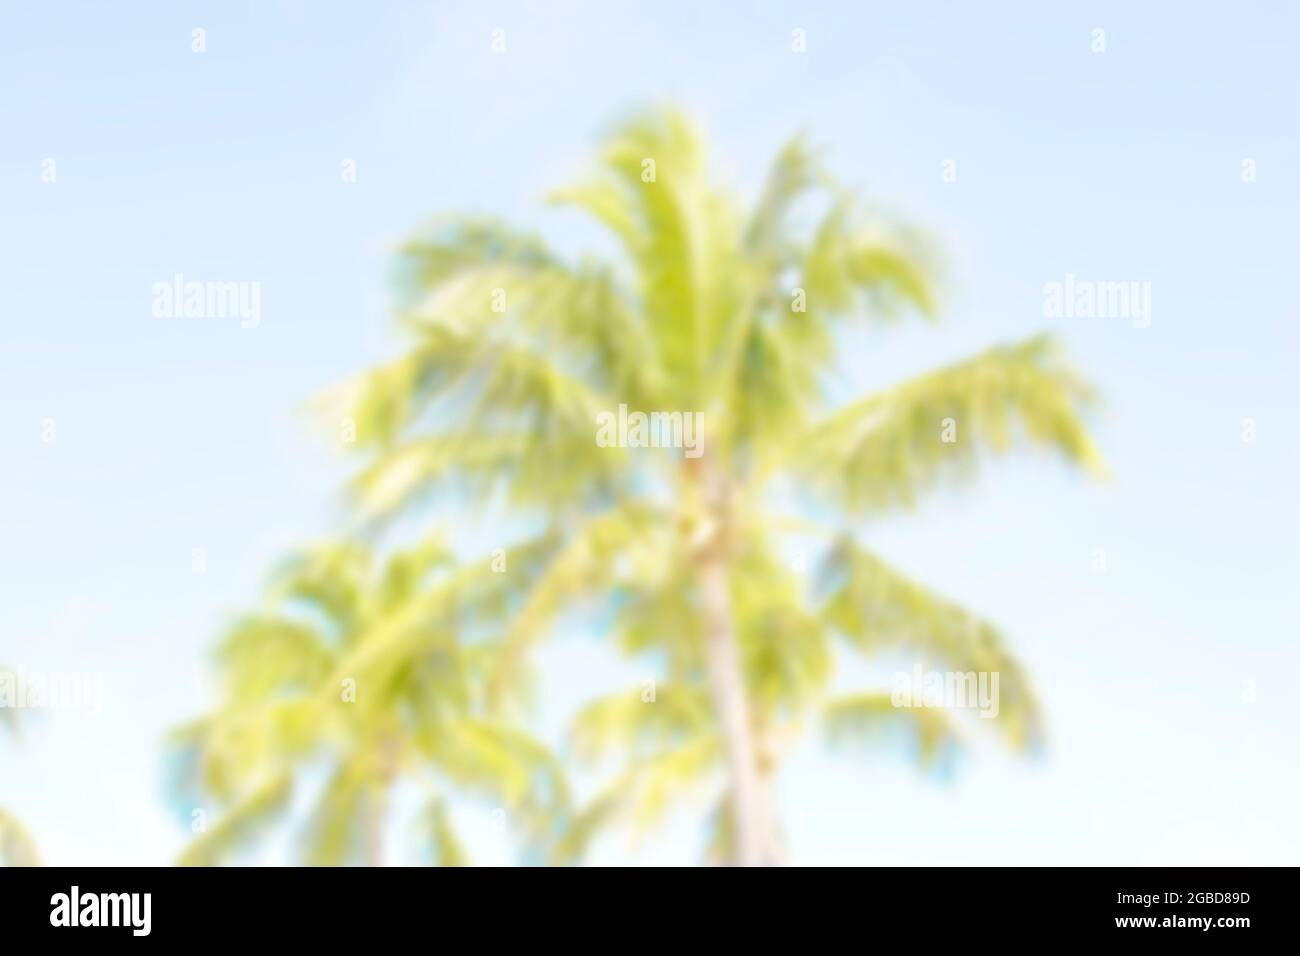 Blurred coconut palm trees for background Stock Photo